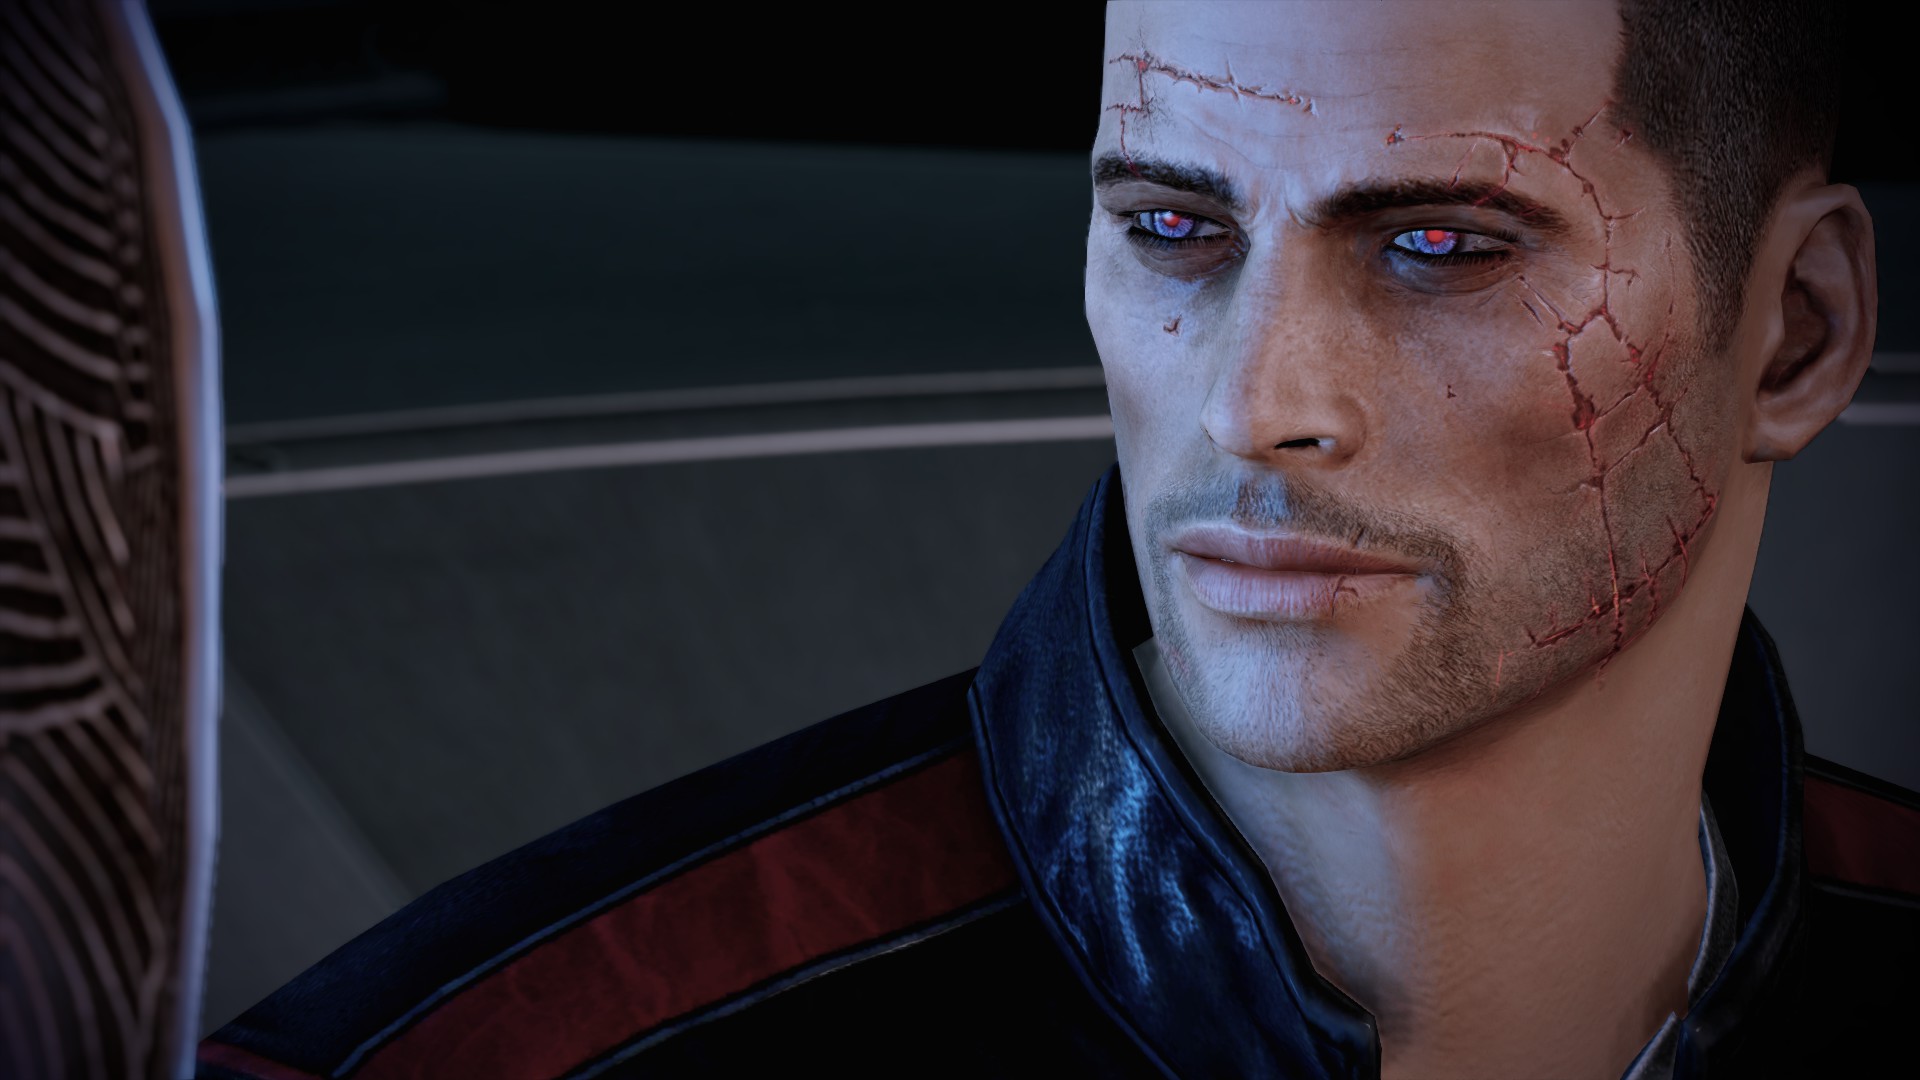 Mass Effect™ Legendary Edition - Game Information to Modding and Configuration - Let's make Mass Effect: Legendary Edition great - 33677D0